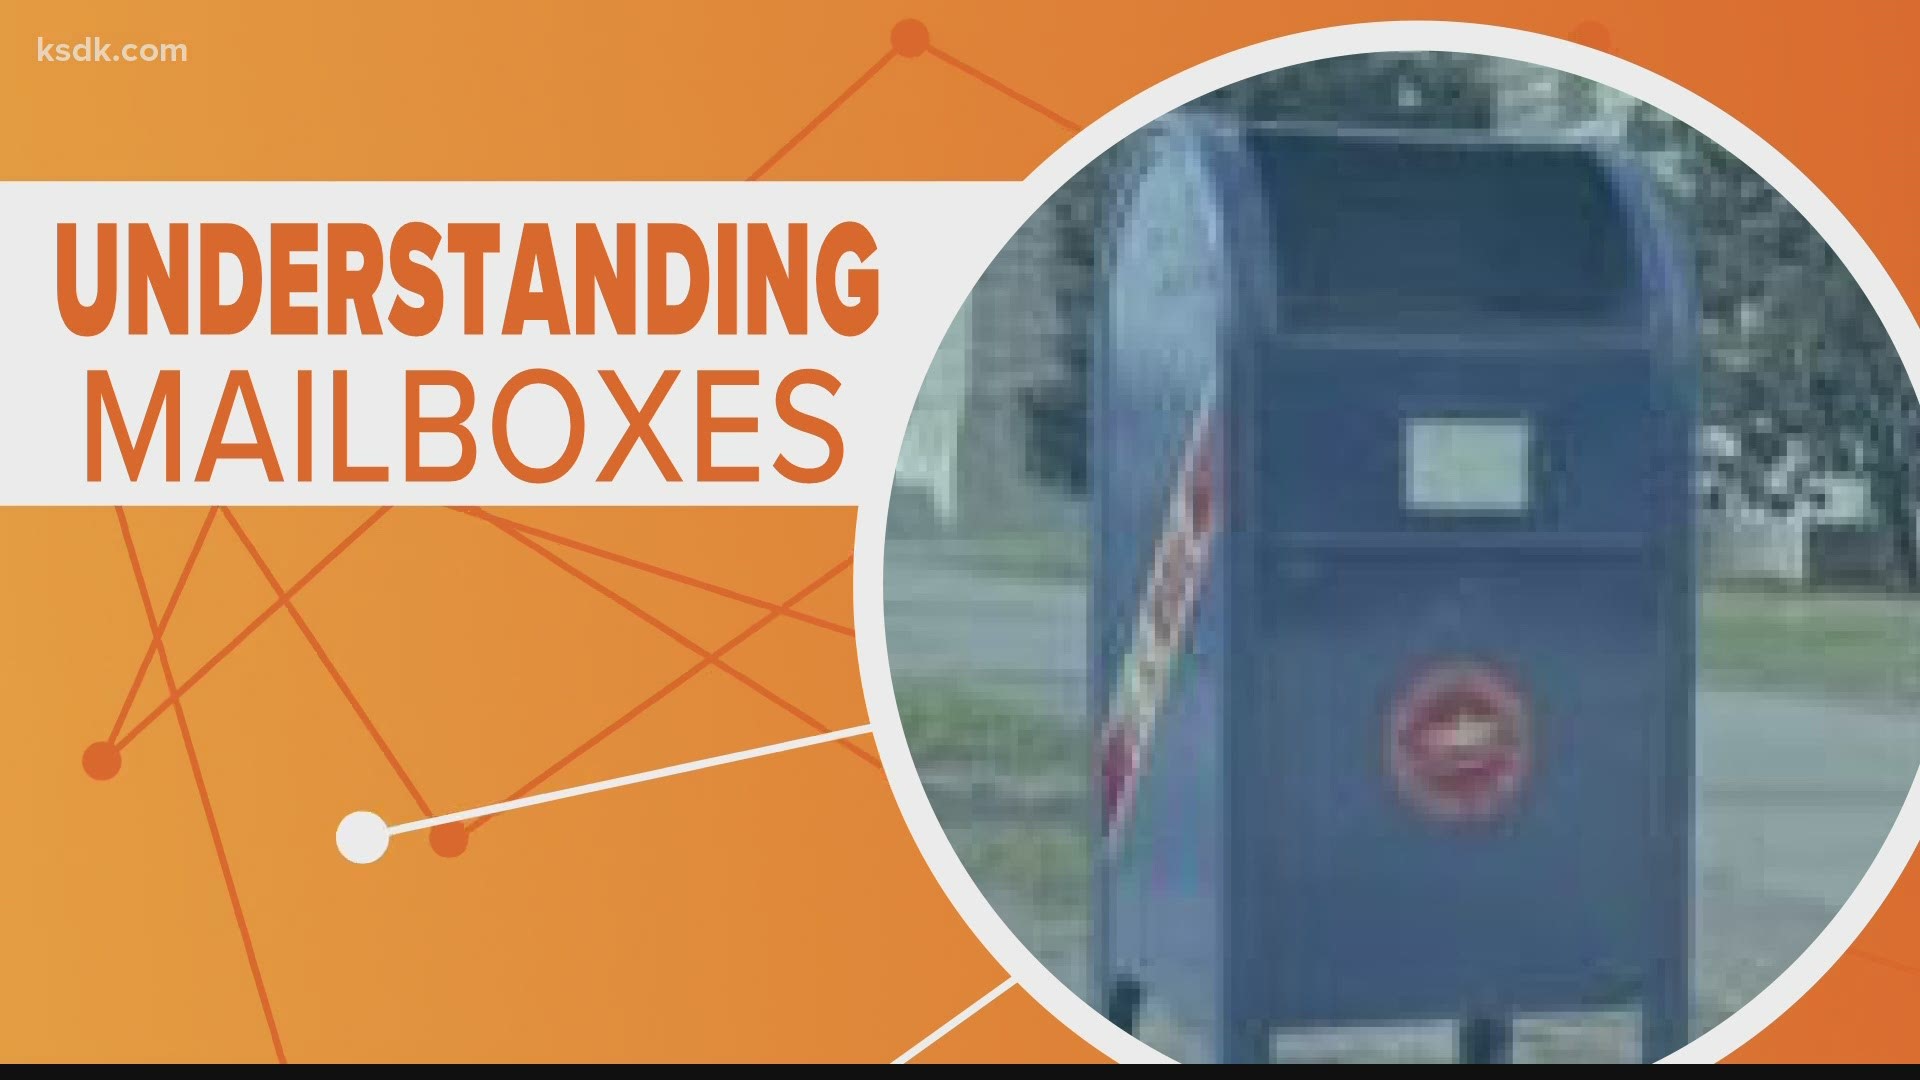 In order to understand the recent decision to remove post office collection boxes, lets go back in time.